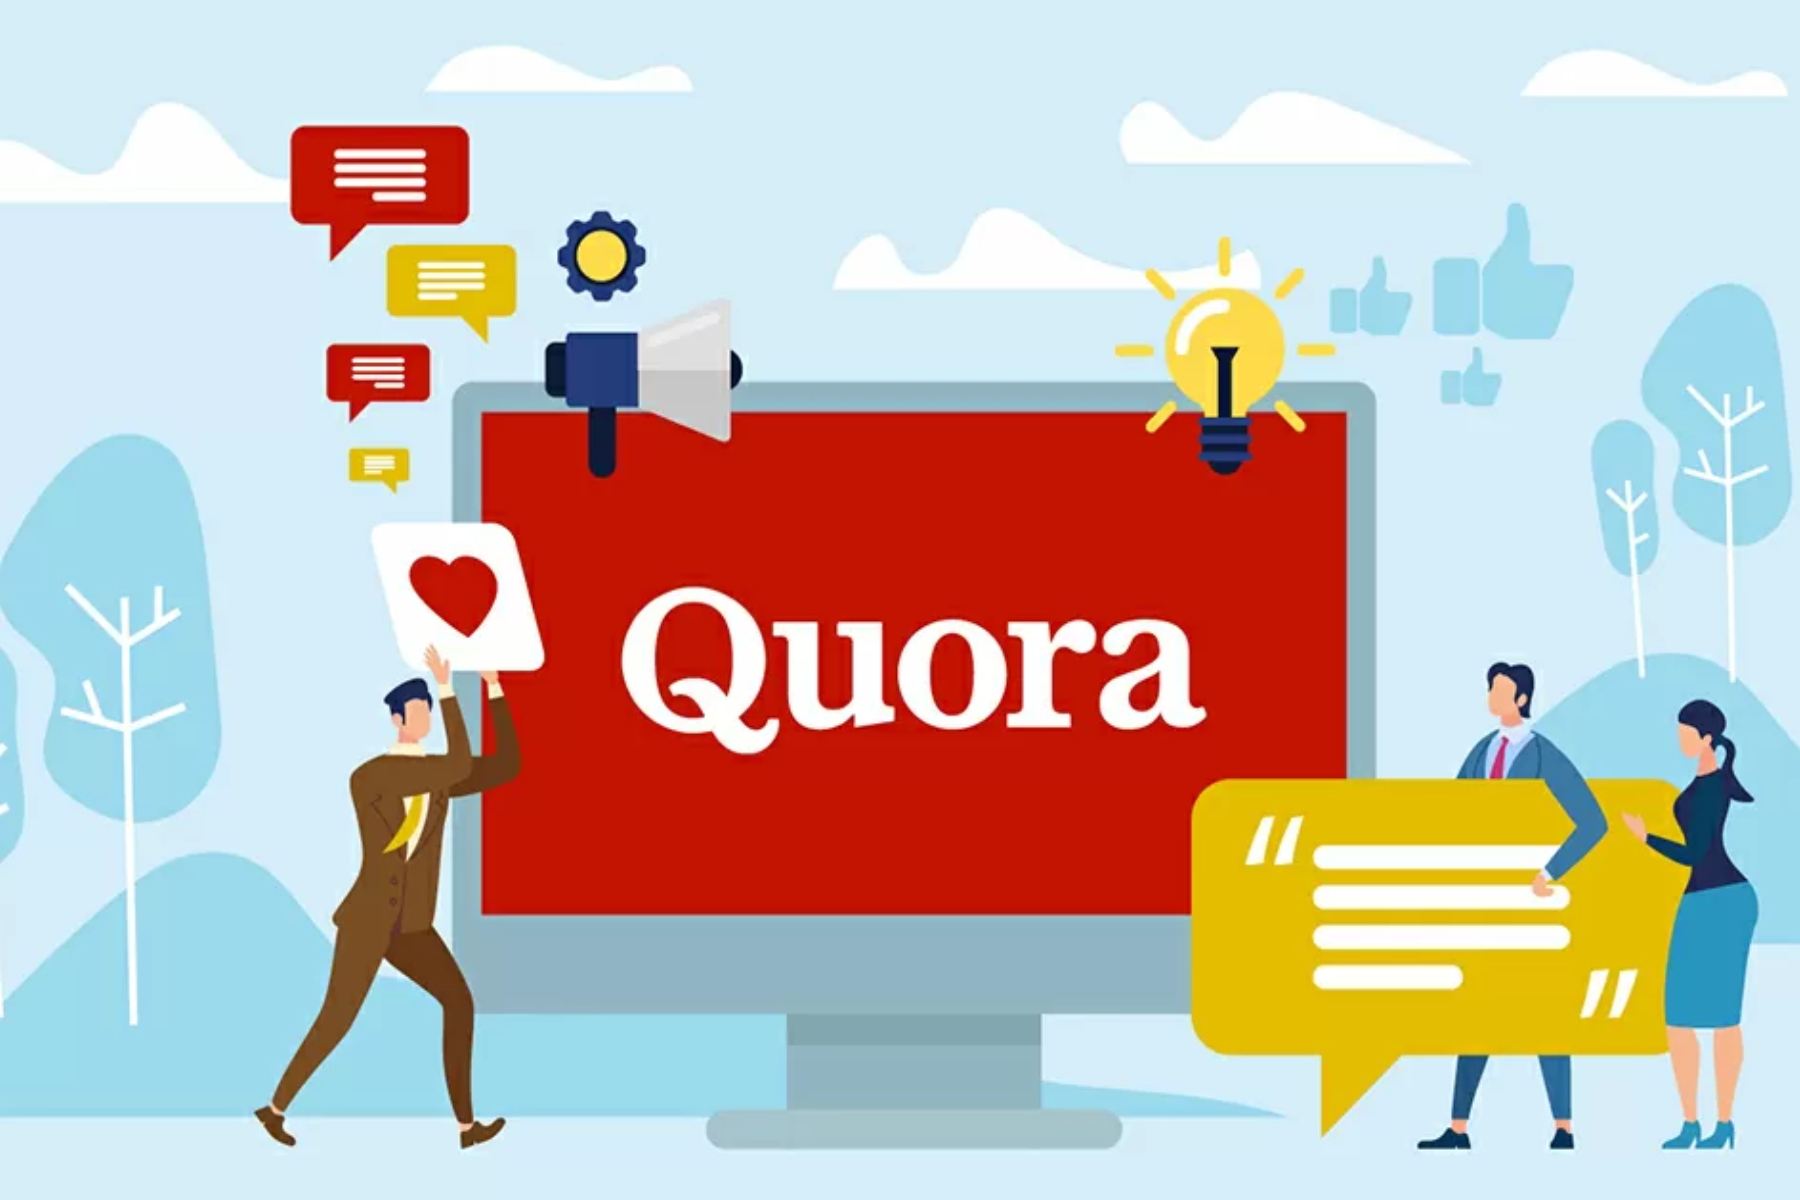 What Is Quora & Why Should You Care - The Hidden Gem Of Social Media